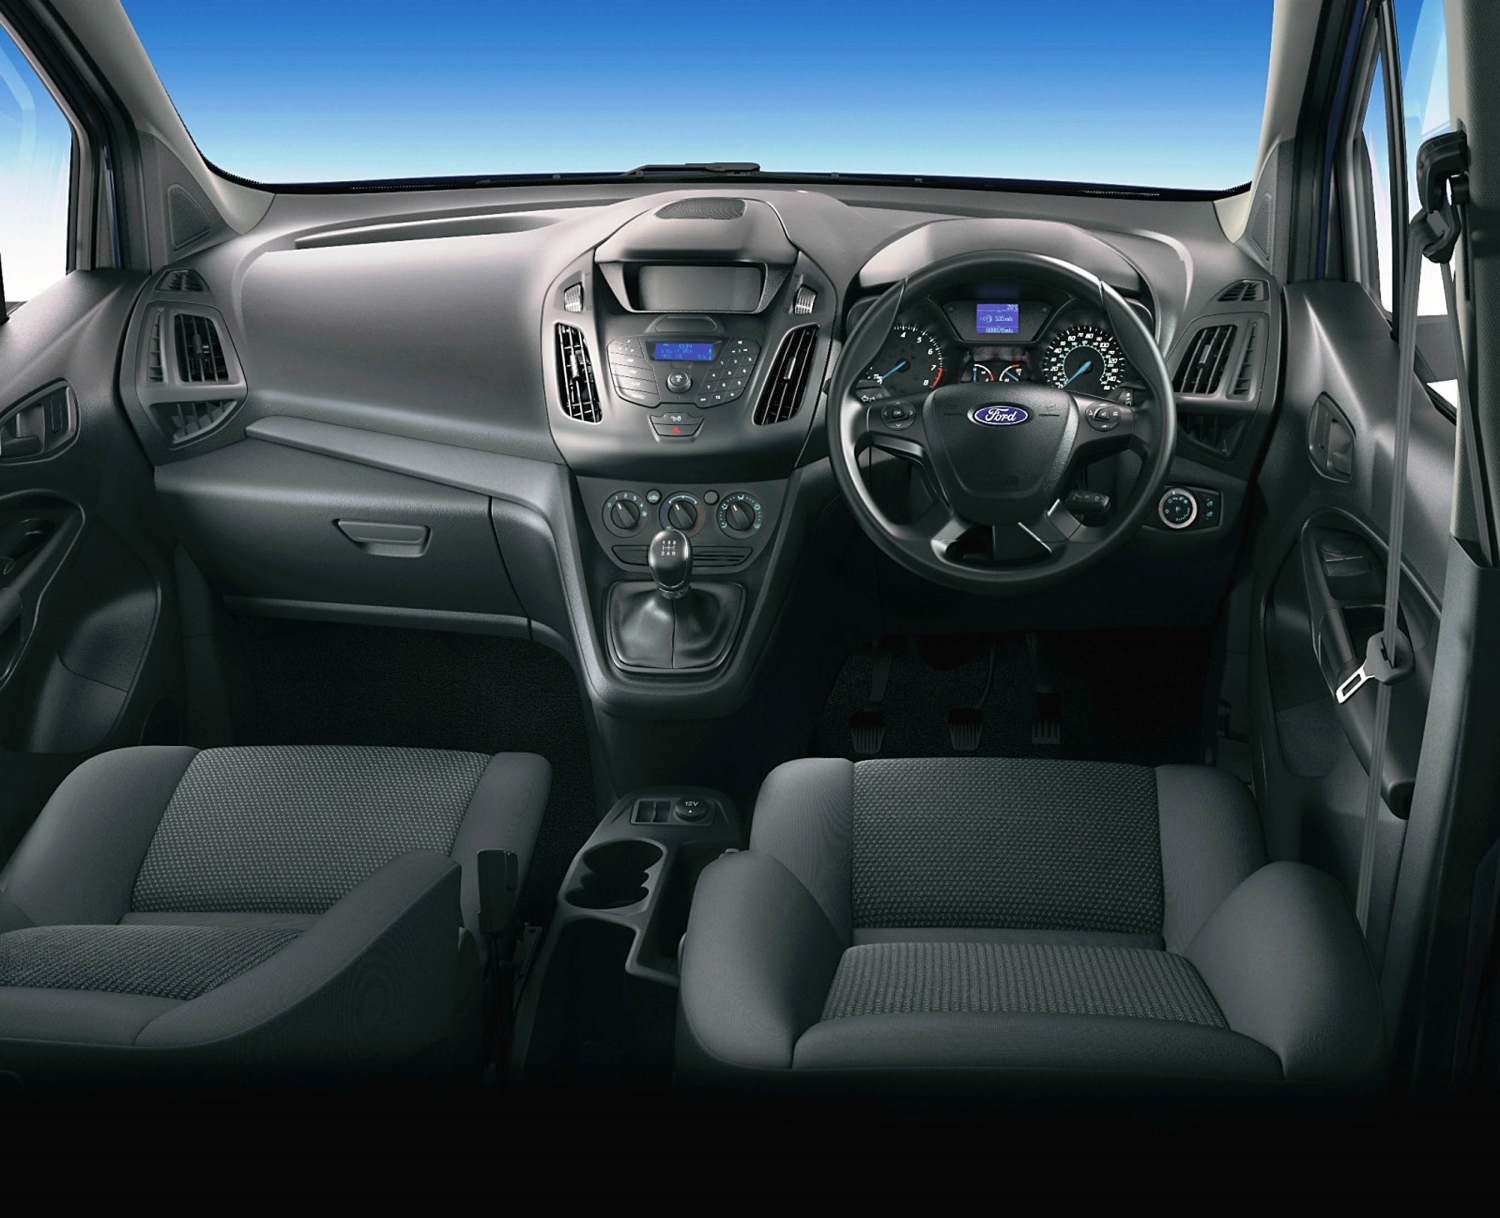 https://fordauthority.com/wp-content/uploads/2020/06/Ford-Transit-Connect-Interior-002.jpg